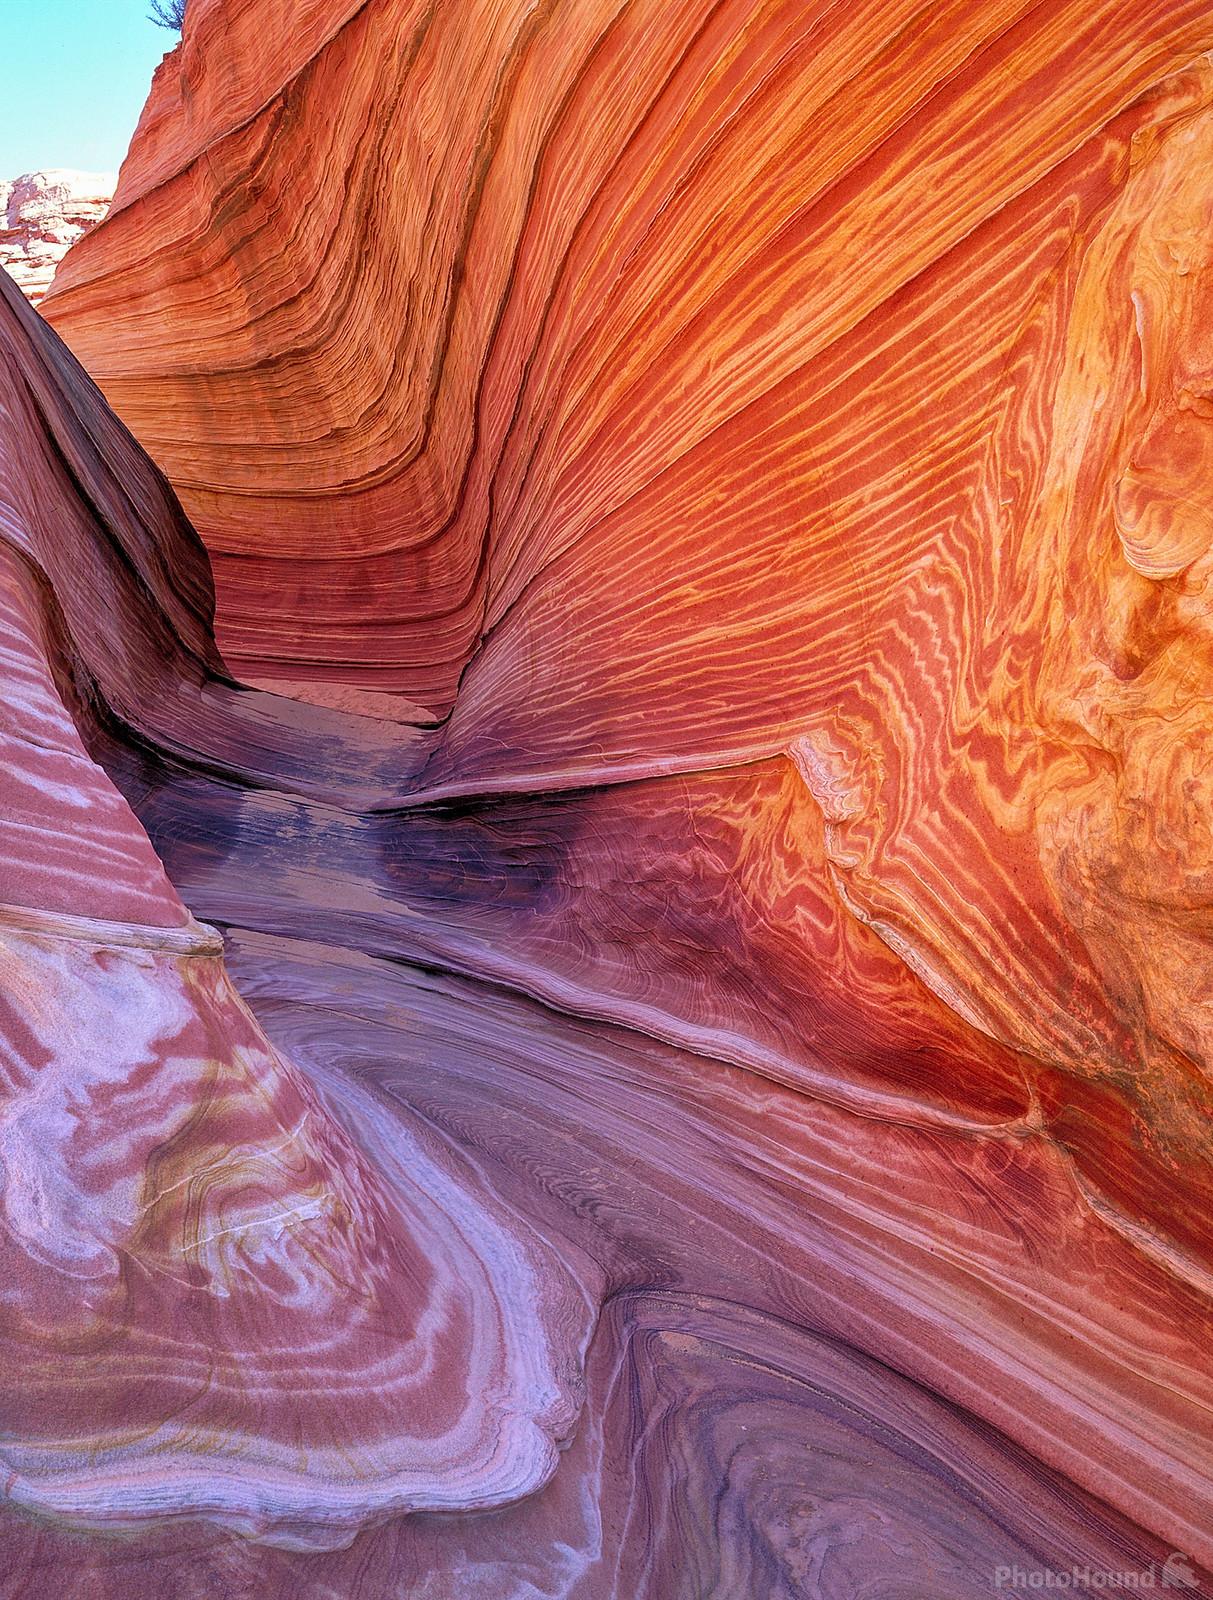 Image of Coyote Buttes North - West Corridor by Laurent Martres